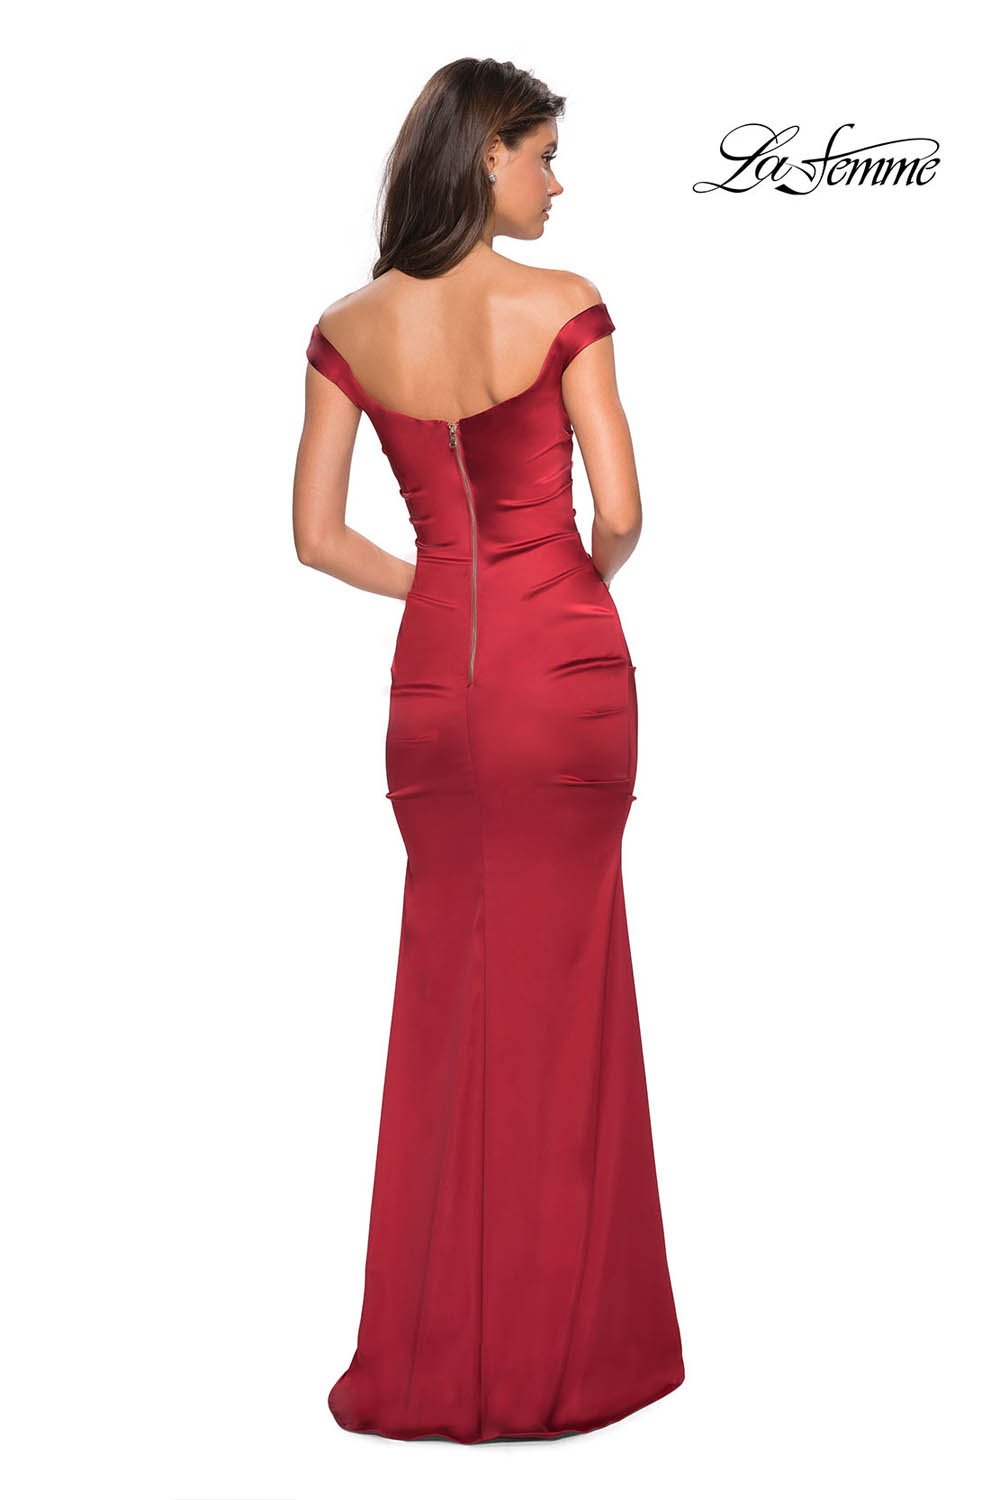 La Femme 27821 dress images in these colors: Red.